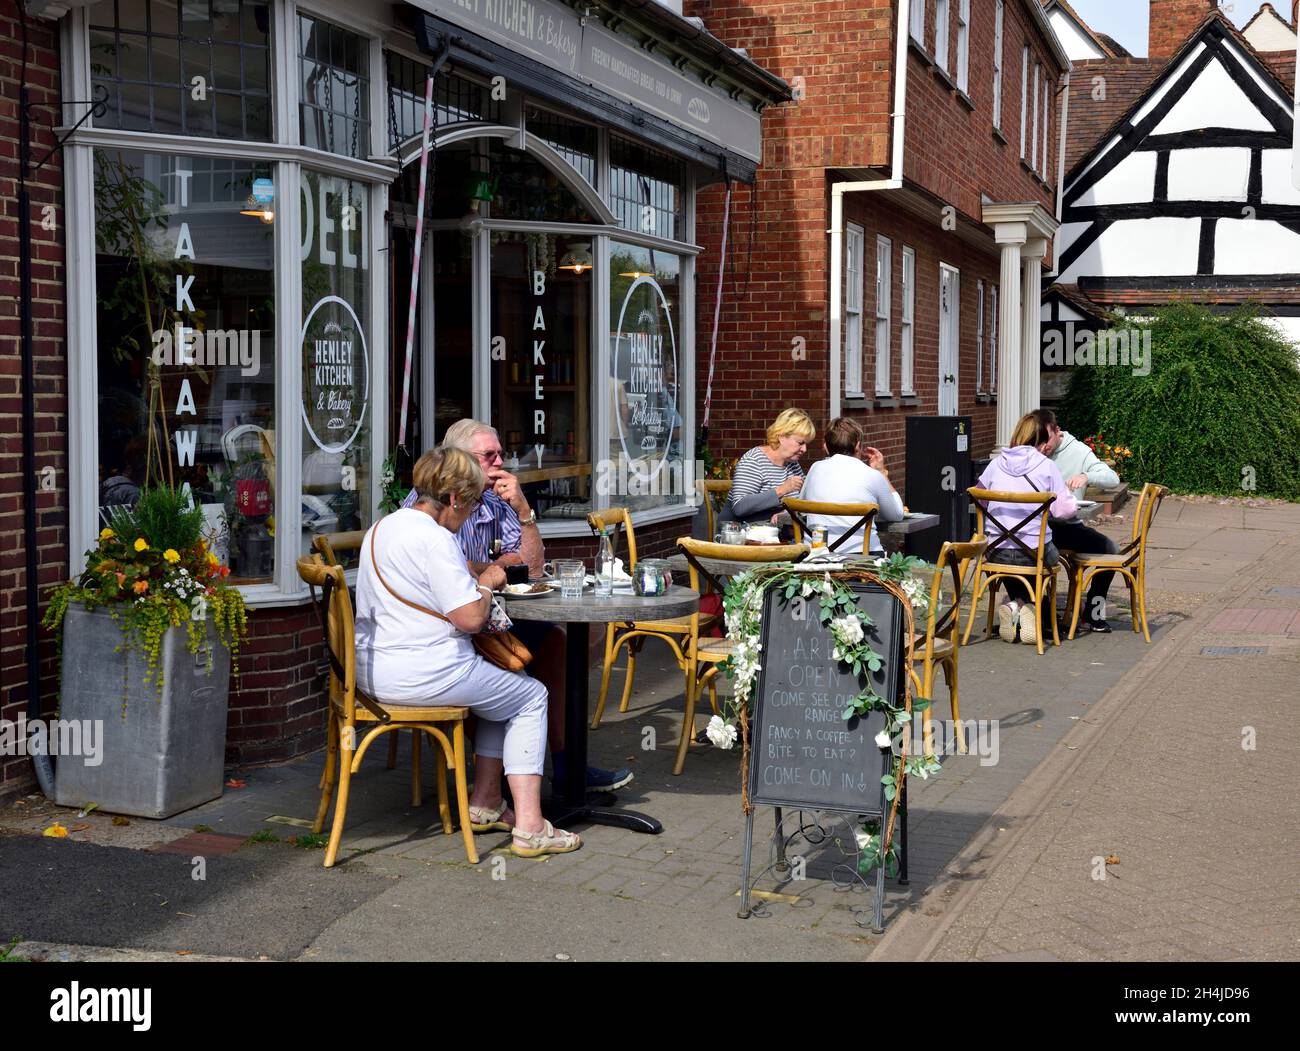 Eating food at tables on pavement outside deli, takeaway, cafe, bakery shop in Henley-in-Arden, Warwickshire, UK Stock Photo